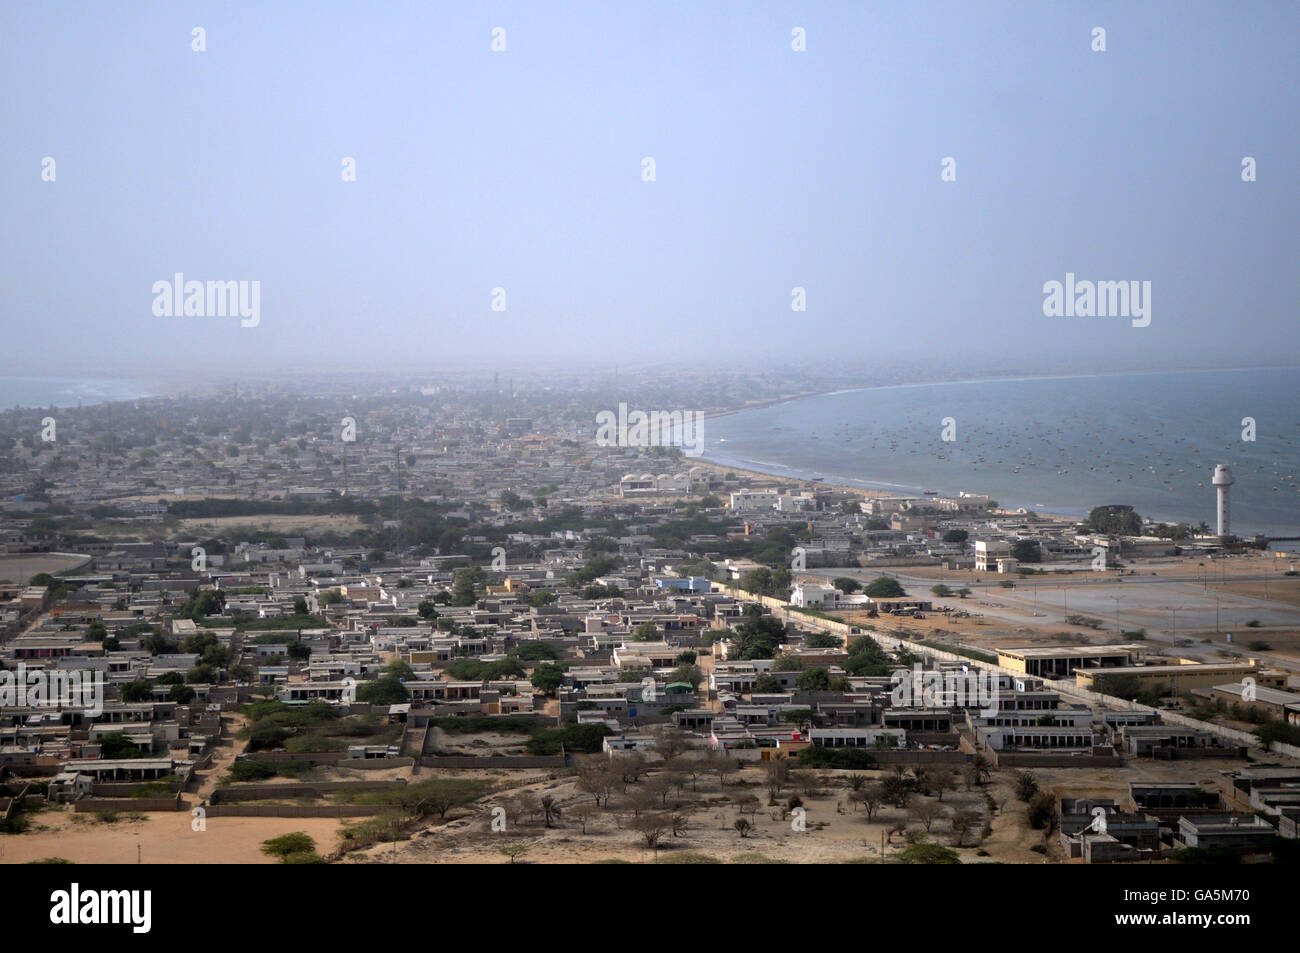 Gwadar. 2nd July, 2016. Photo taken on July 2, 2016, shows view of the city near Gwadar Port in southwest Pakistan. Gwadar Port is a warm-water, deep-sea port situated on the Arabian Sea in Balochistan province of Pakistan. China and Pakistan agreed to build China-Pakistan Economic Corridor (CPEC), a major and pilot project under the Belt and Road Initiative, to connect the Pakistani Gwadar port with Kashgar city in China's Xinjiang Uygur Autonomous Region. © Ahmad Kamal/Xinhua/Alamy Live News Stock Photo